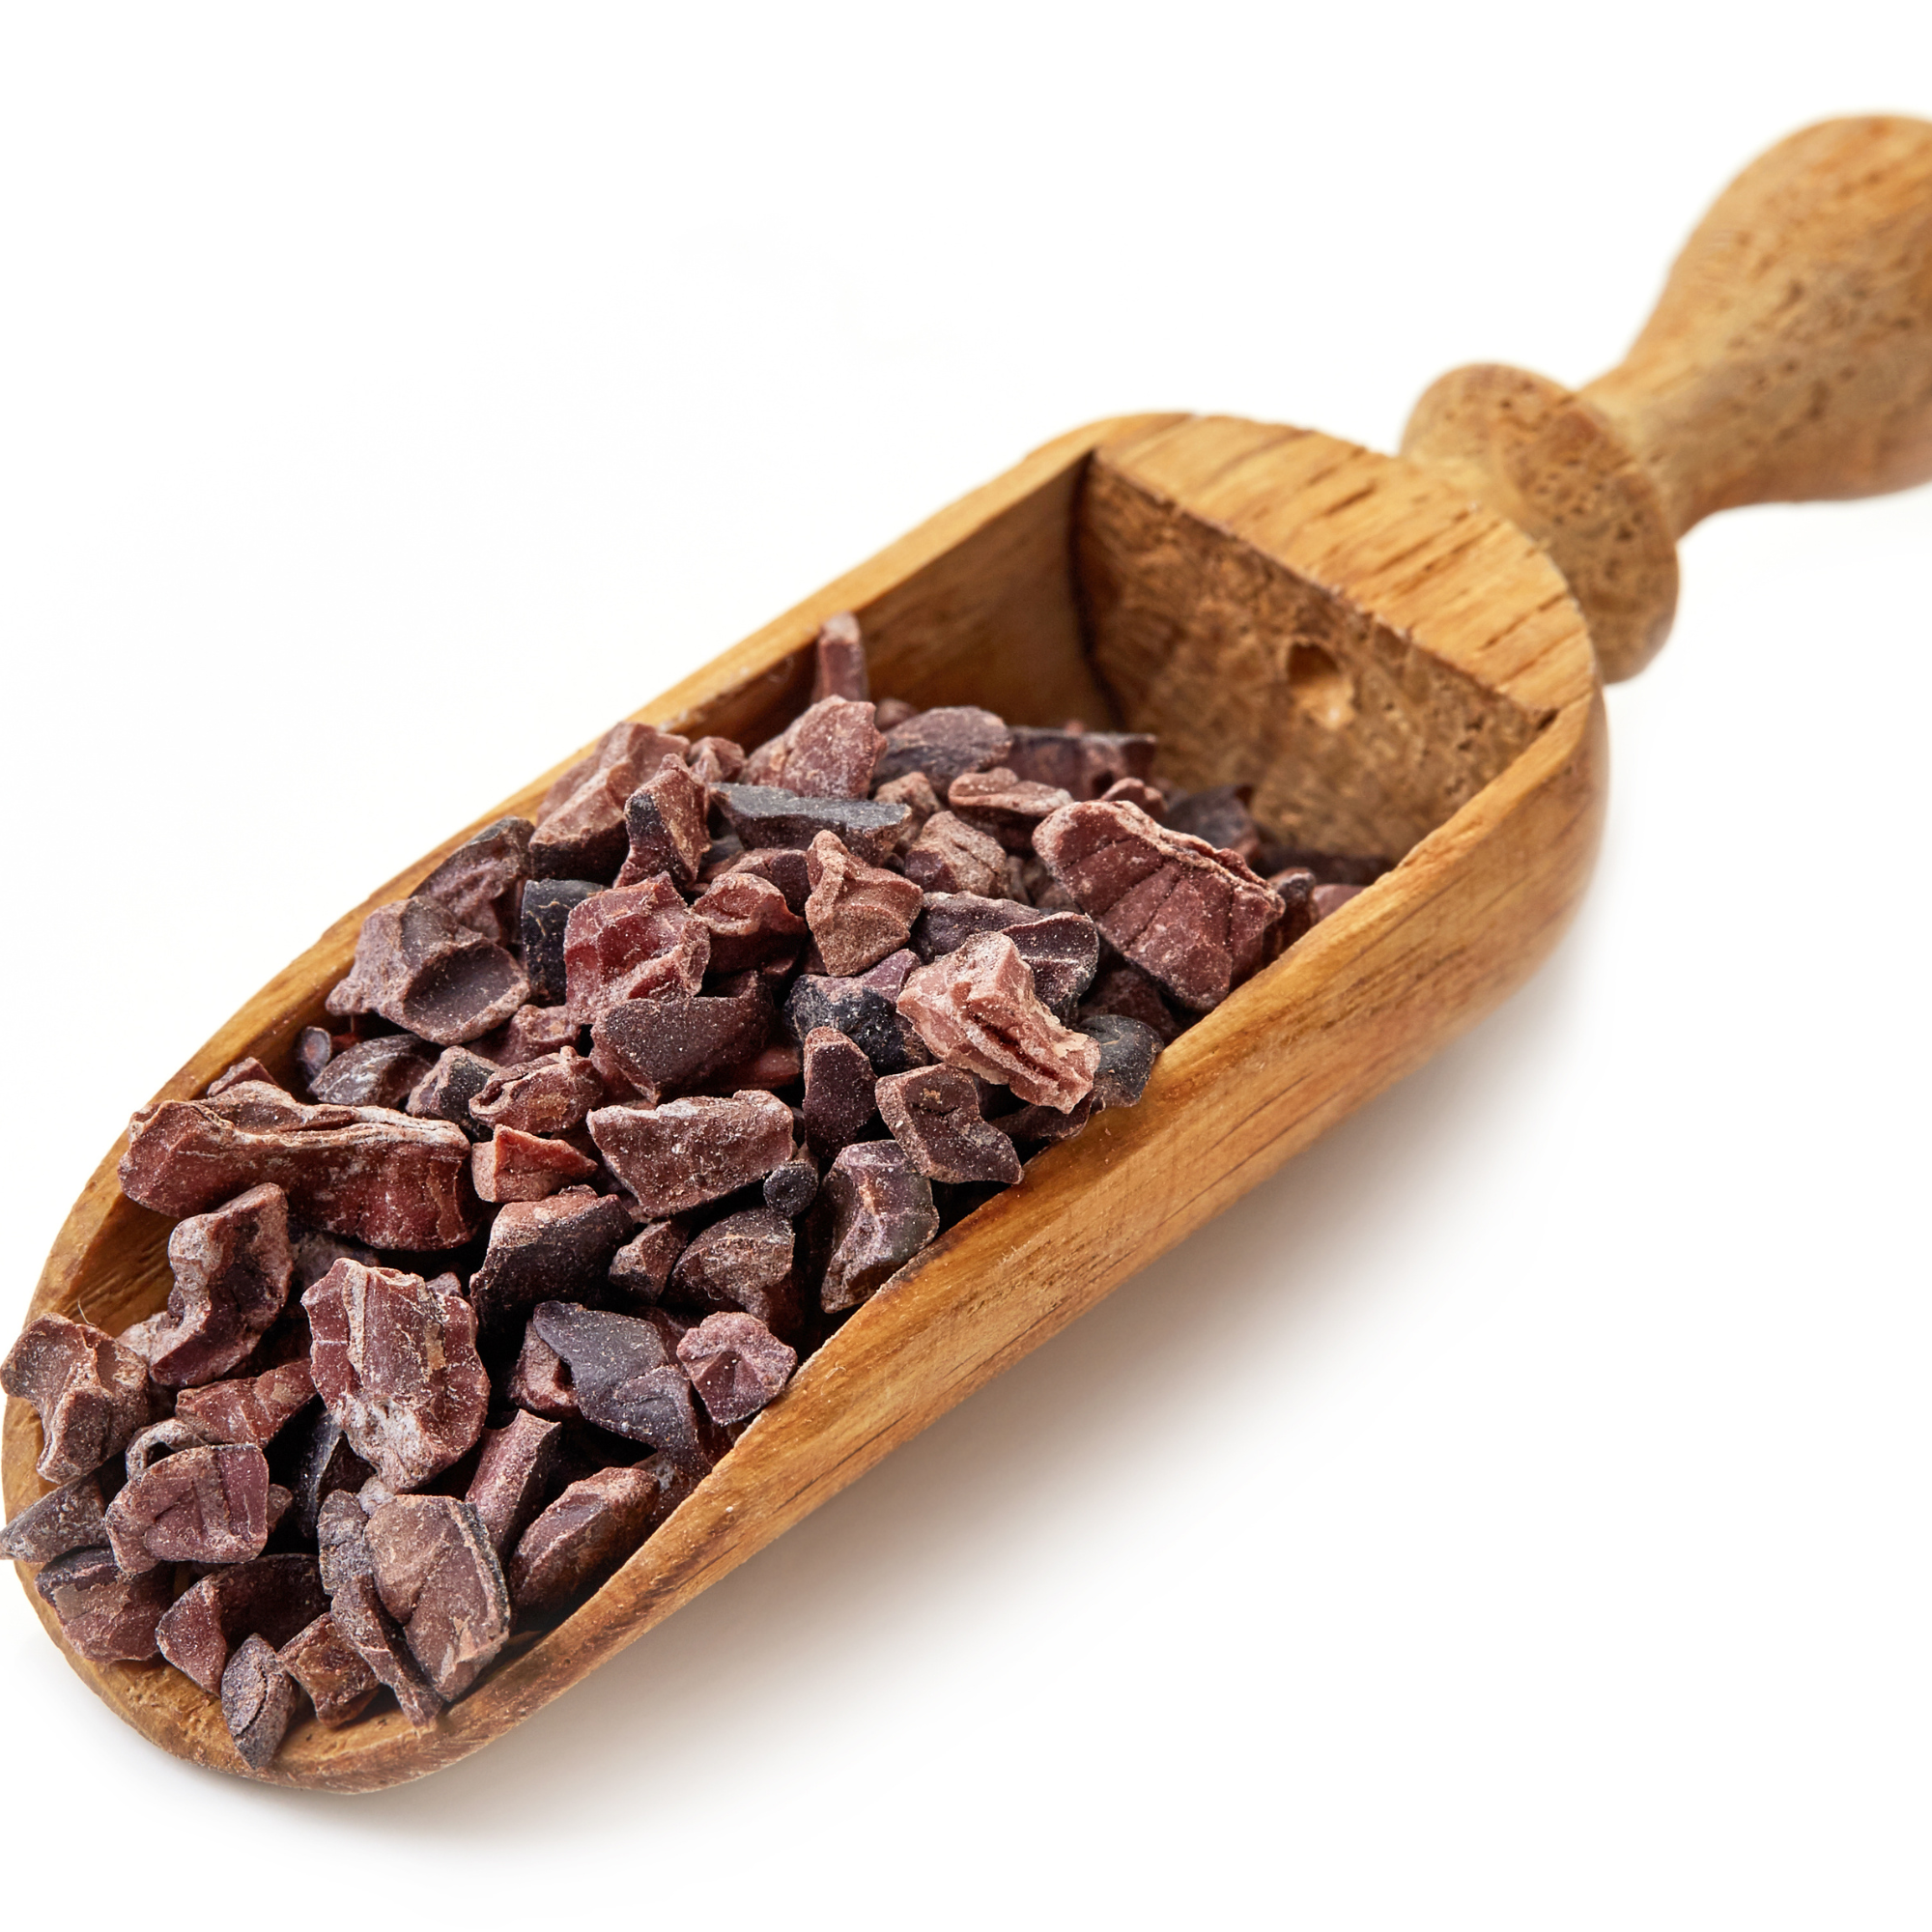 Wooden scoop filled with cacao nibs